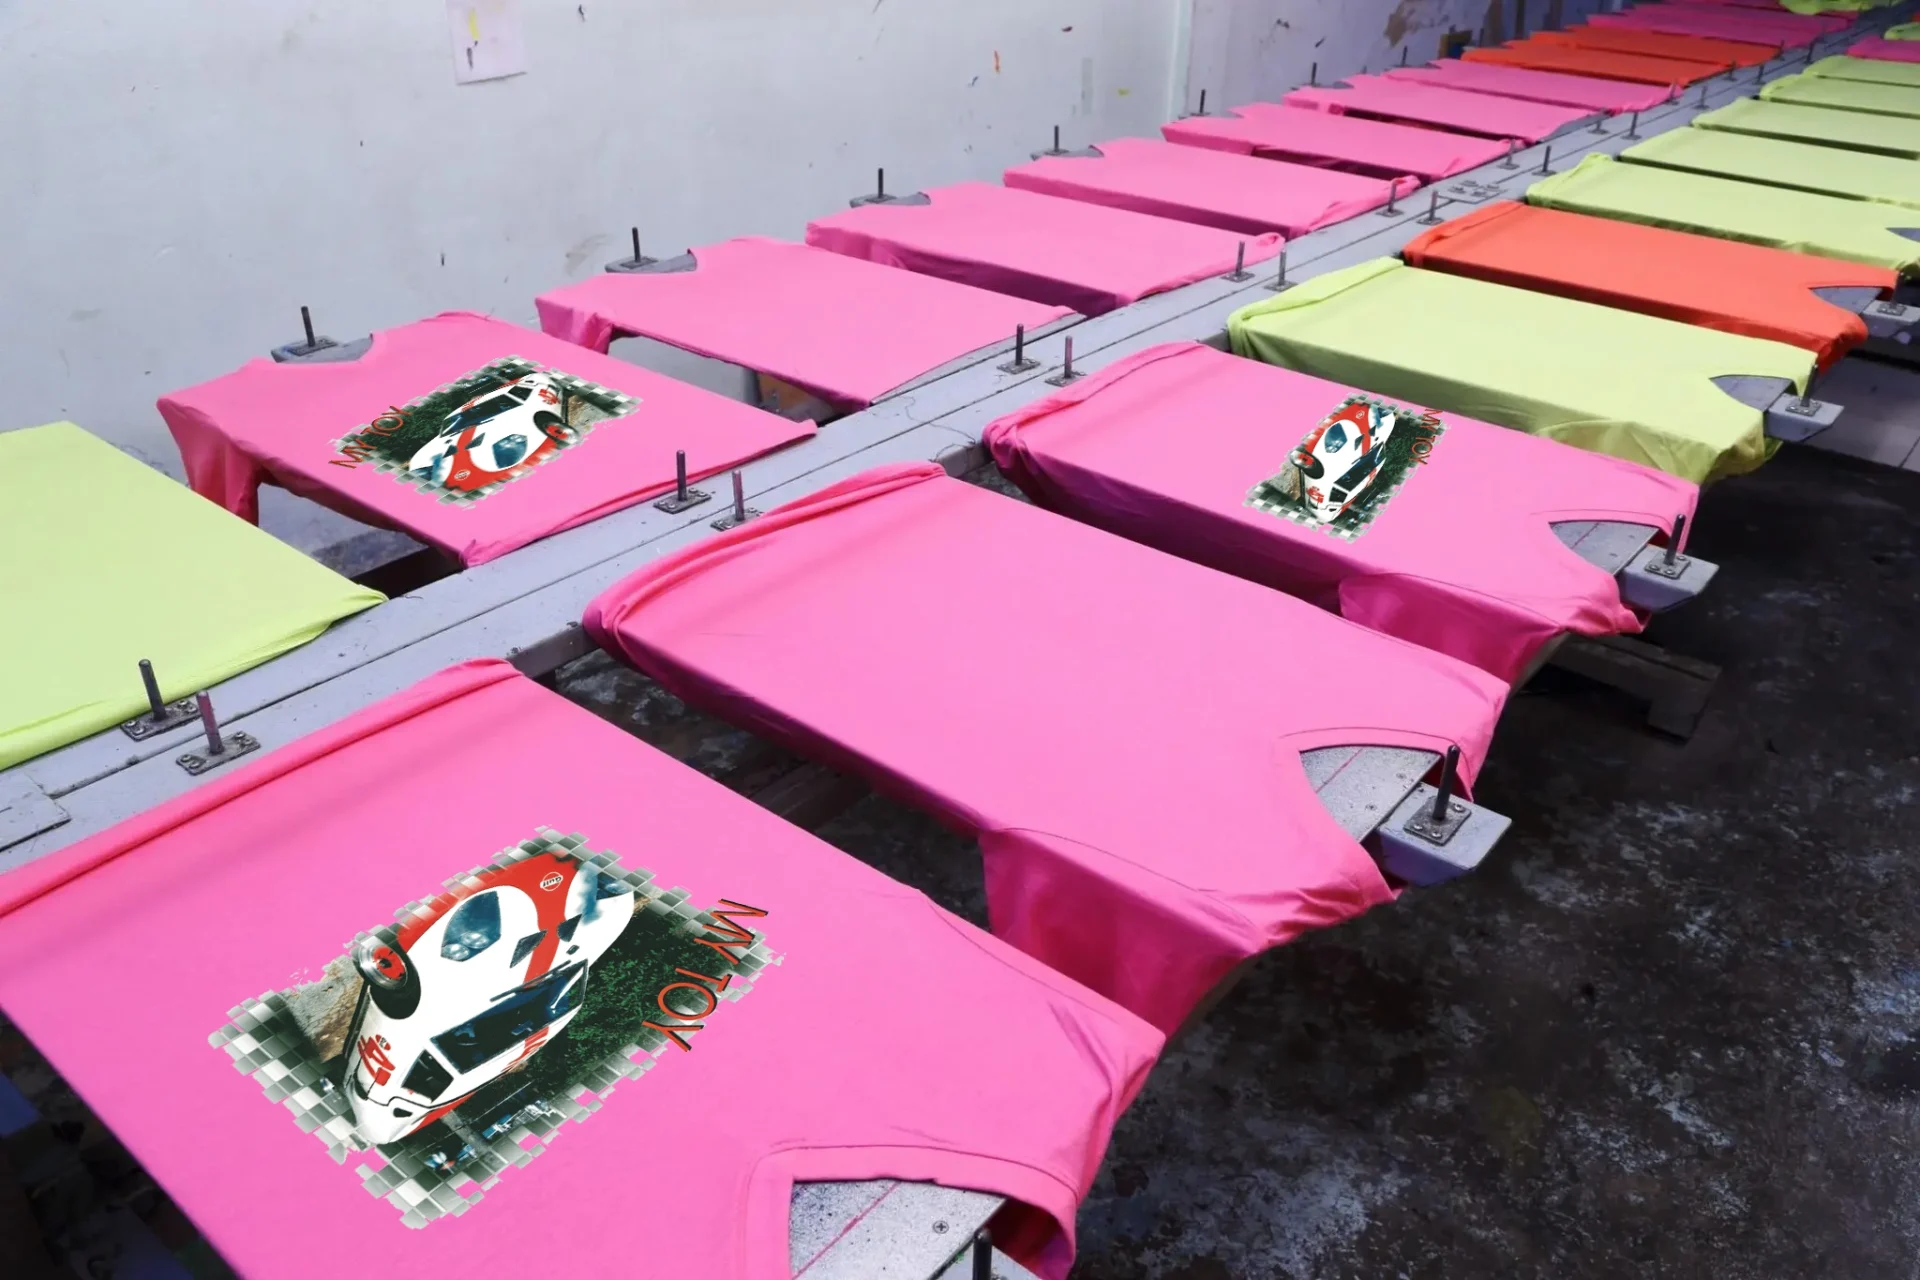 A row of cakes on top of pink sheets.